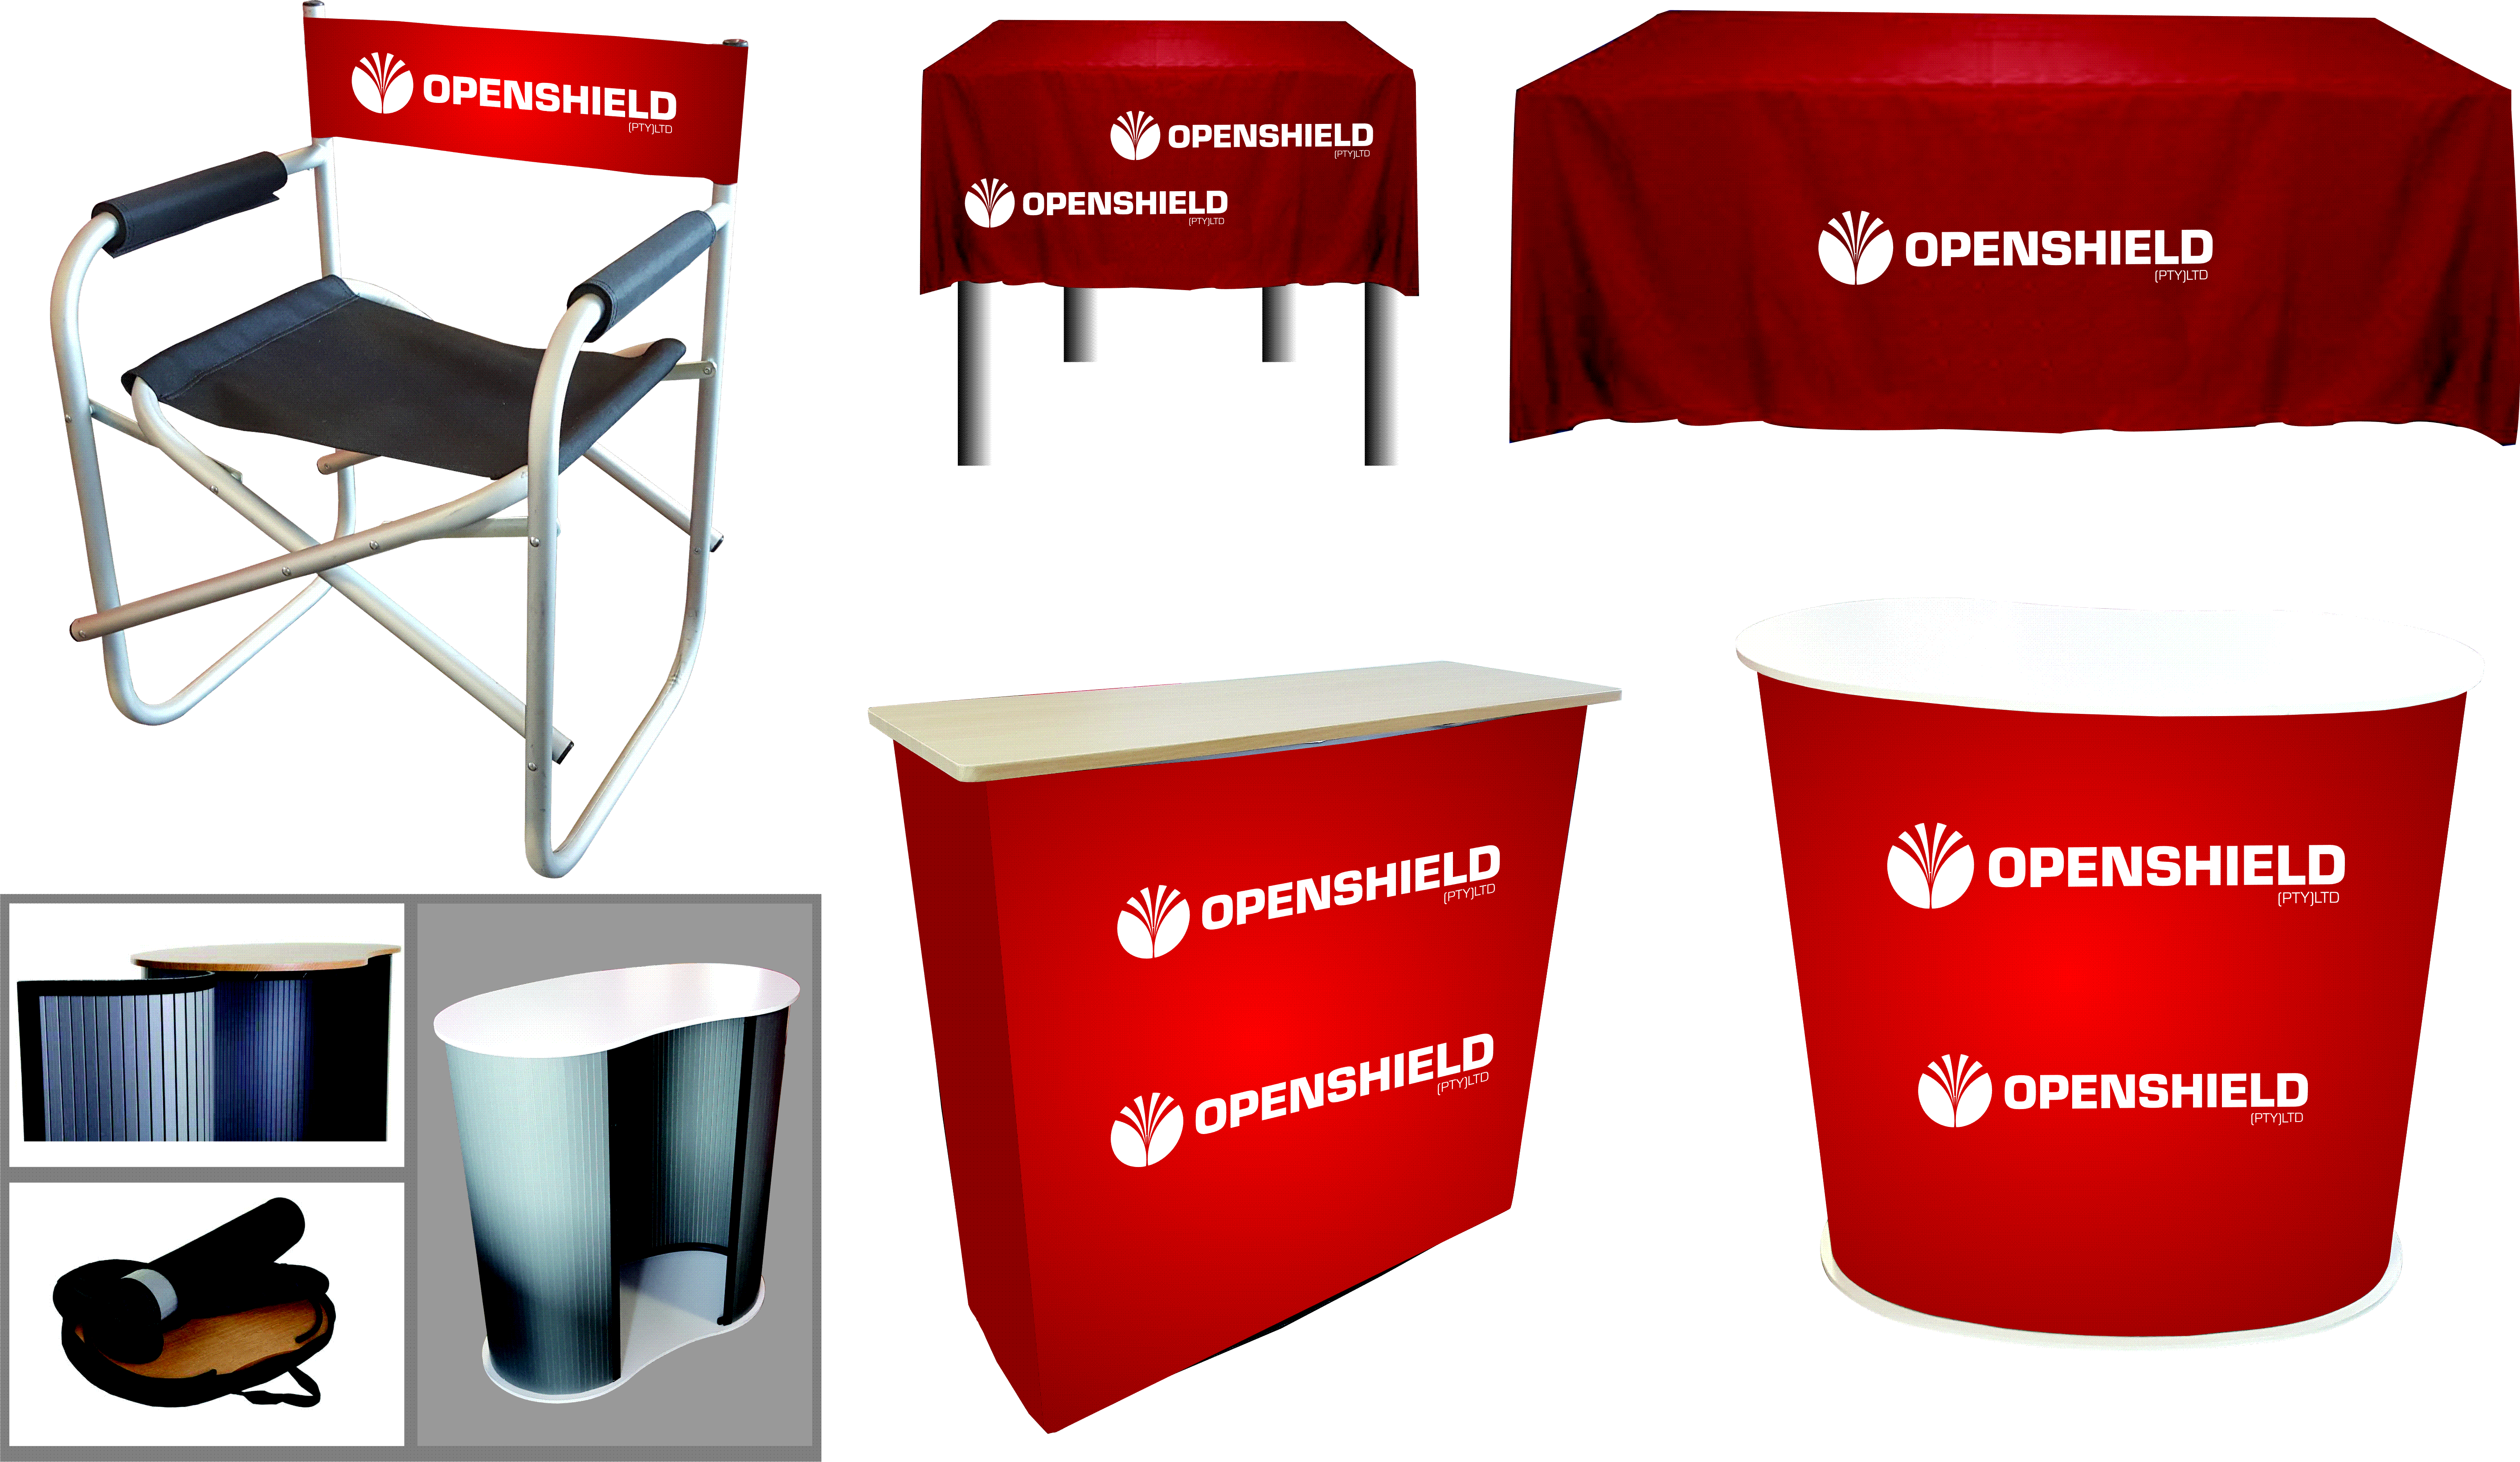 A Frames, Straight and Curved Podiums, Director's Chair, Branded Table cloths,